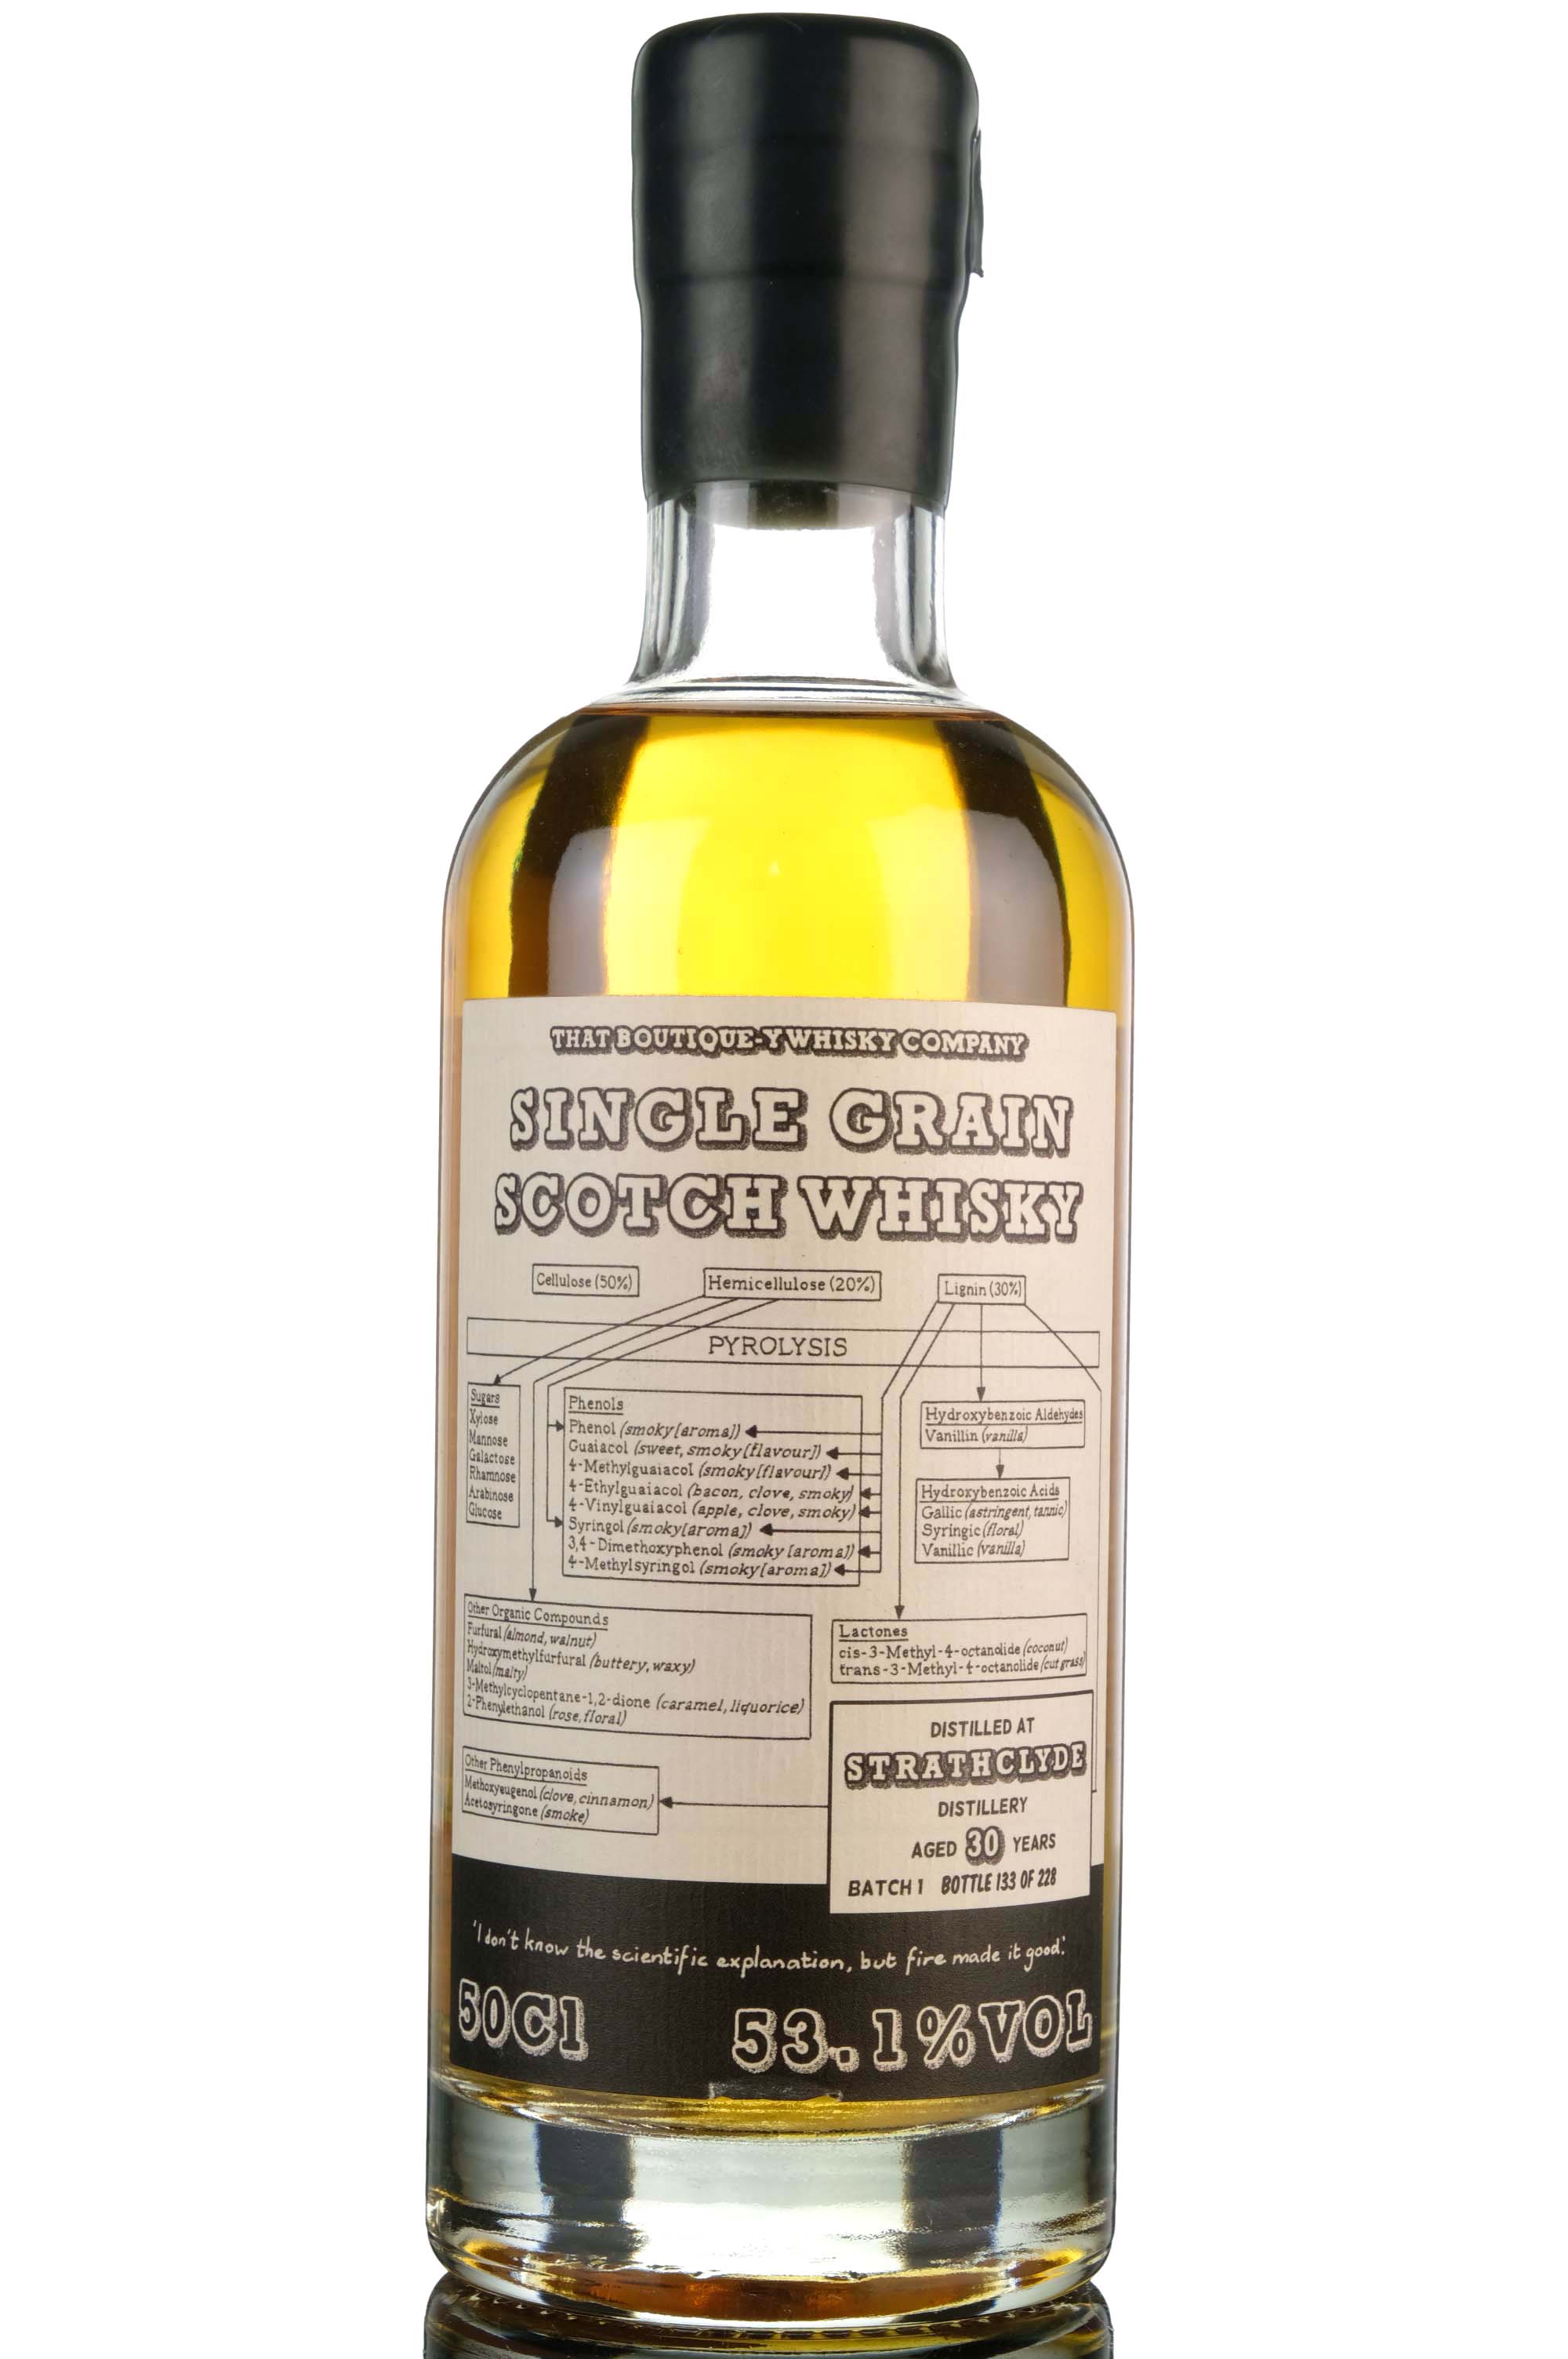 Strathclyde 30 Year Old - That Boutique-y Whisky Company - Batch 1 - 2016 Release